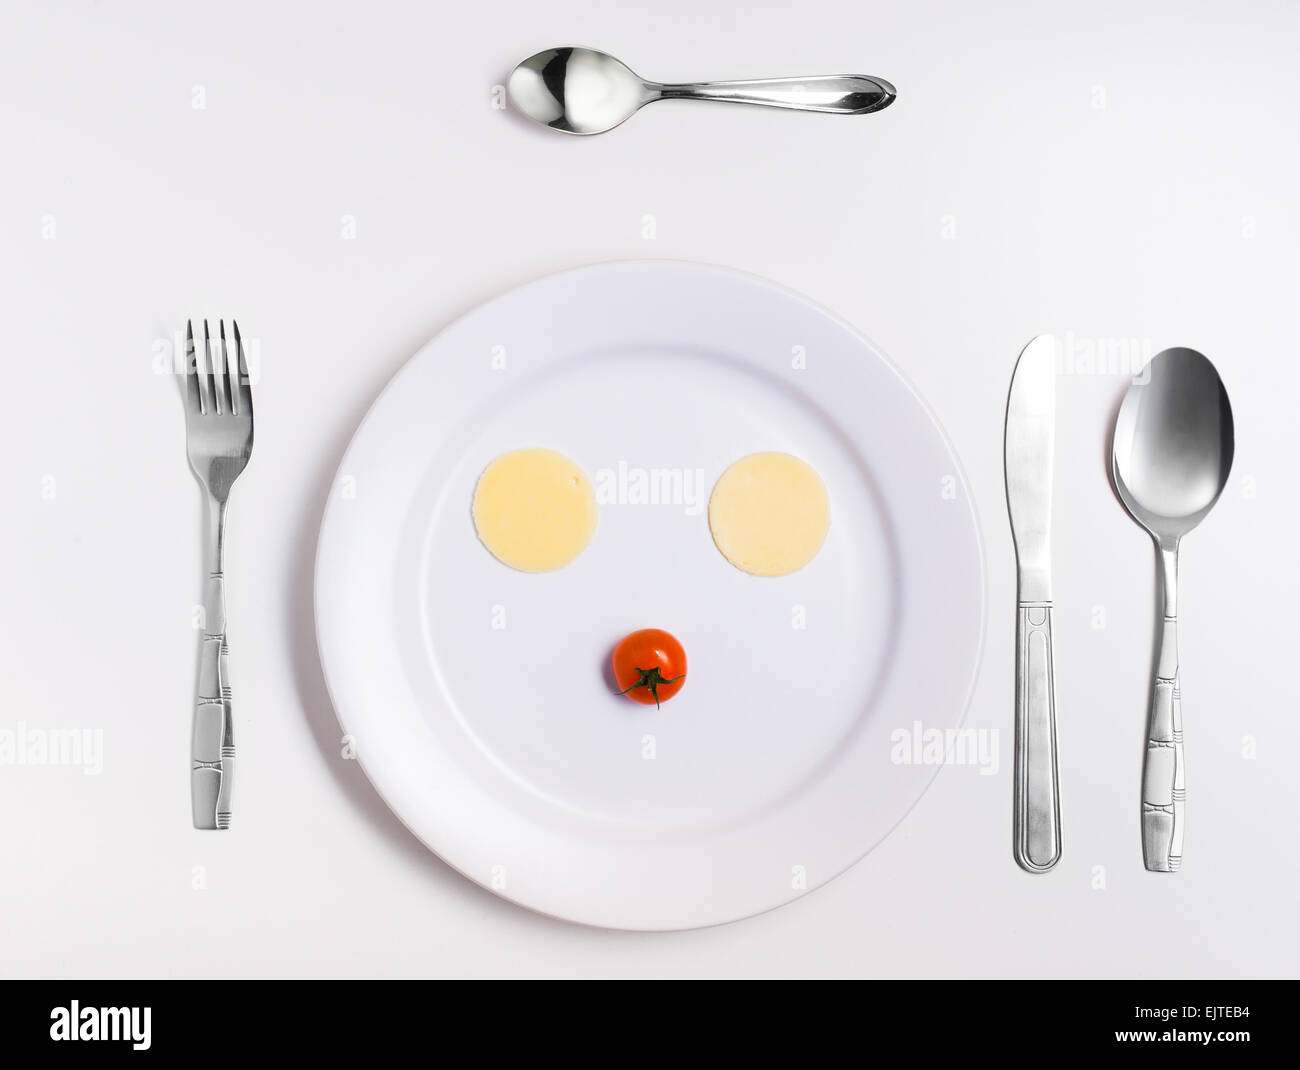 emoticon food, made from cheese, tomatoes, on a plate with cutlery Stock Photo